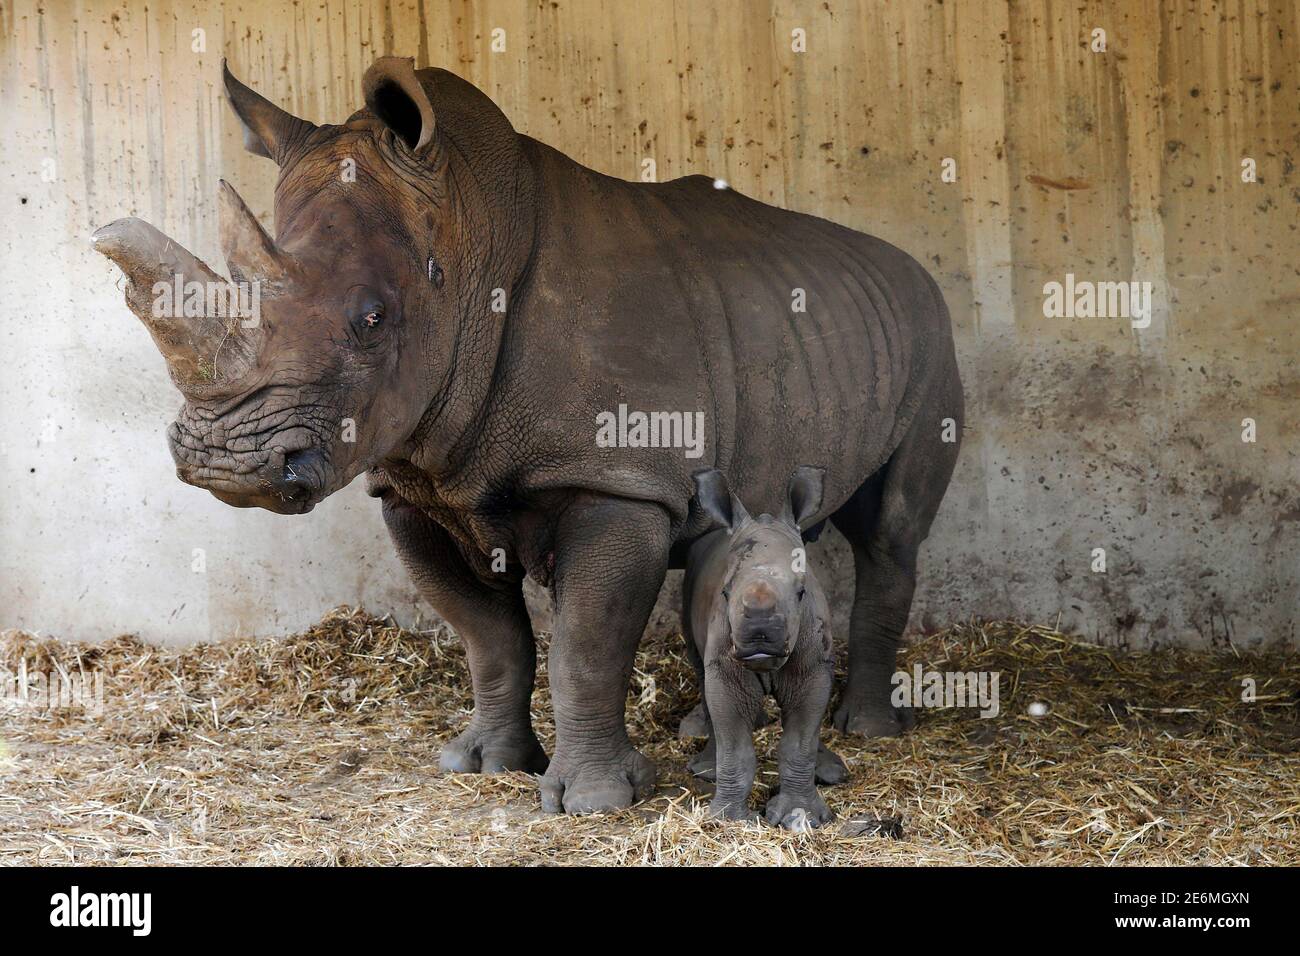 Tanda, a 23 year-old white rhinoceros and her week-old calf stand in their enclosure at the Ramat Gan Safari Zoo near Tel Aviv, Israel August 25, 2016. REUTERS/Baz Ratner Stock Photo